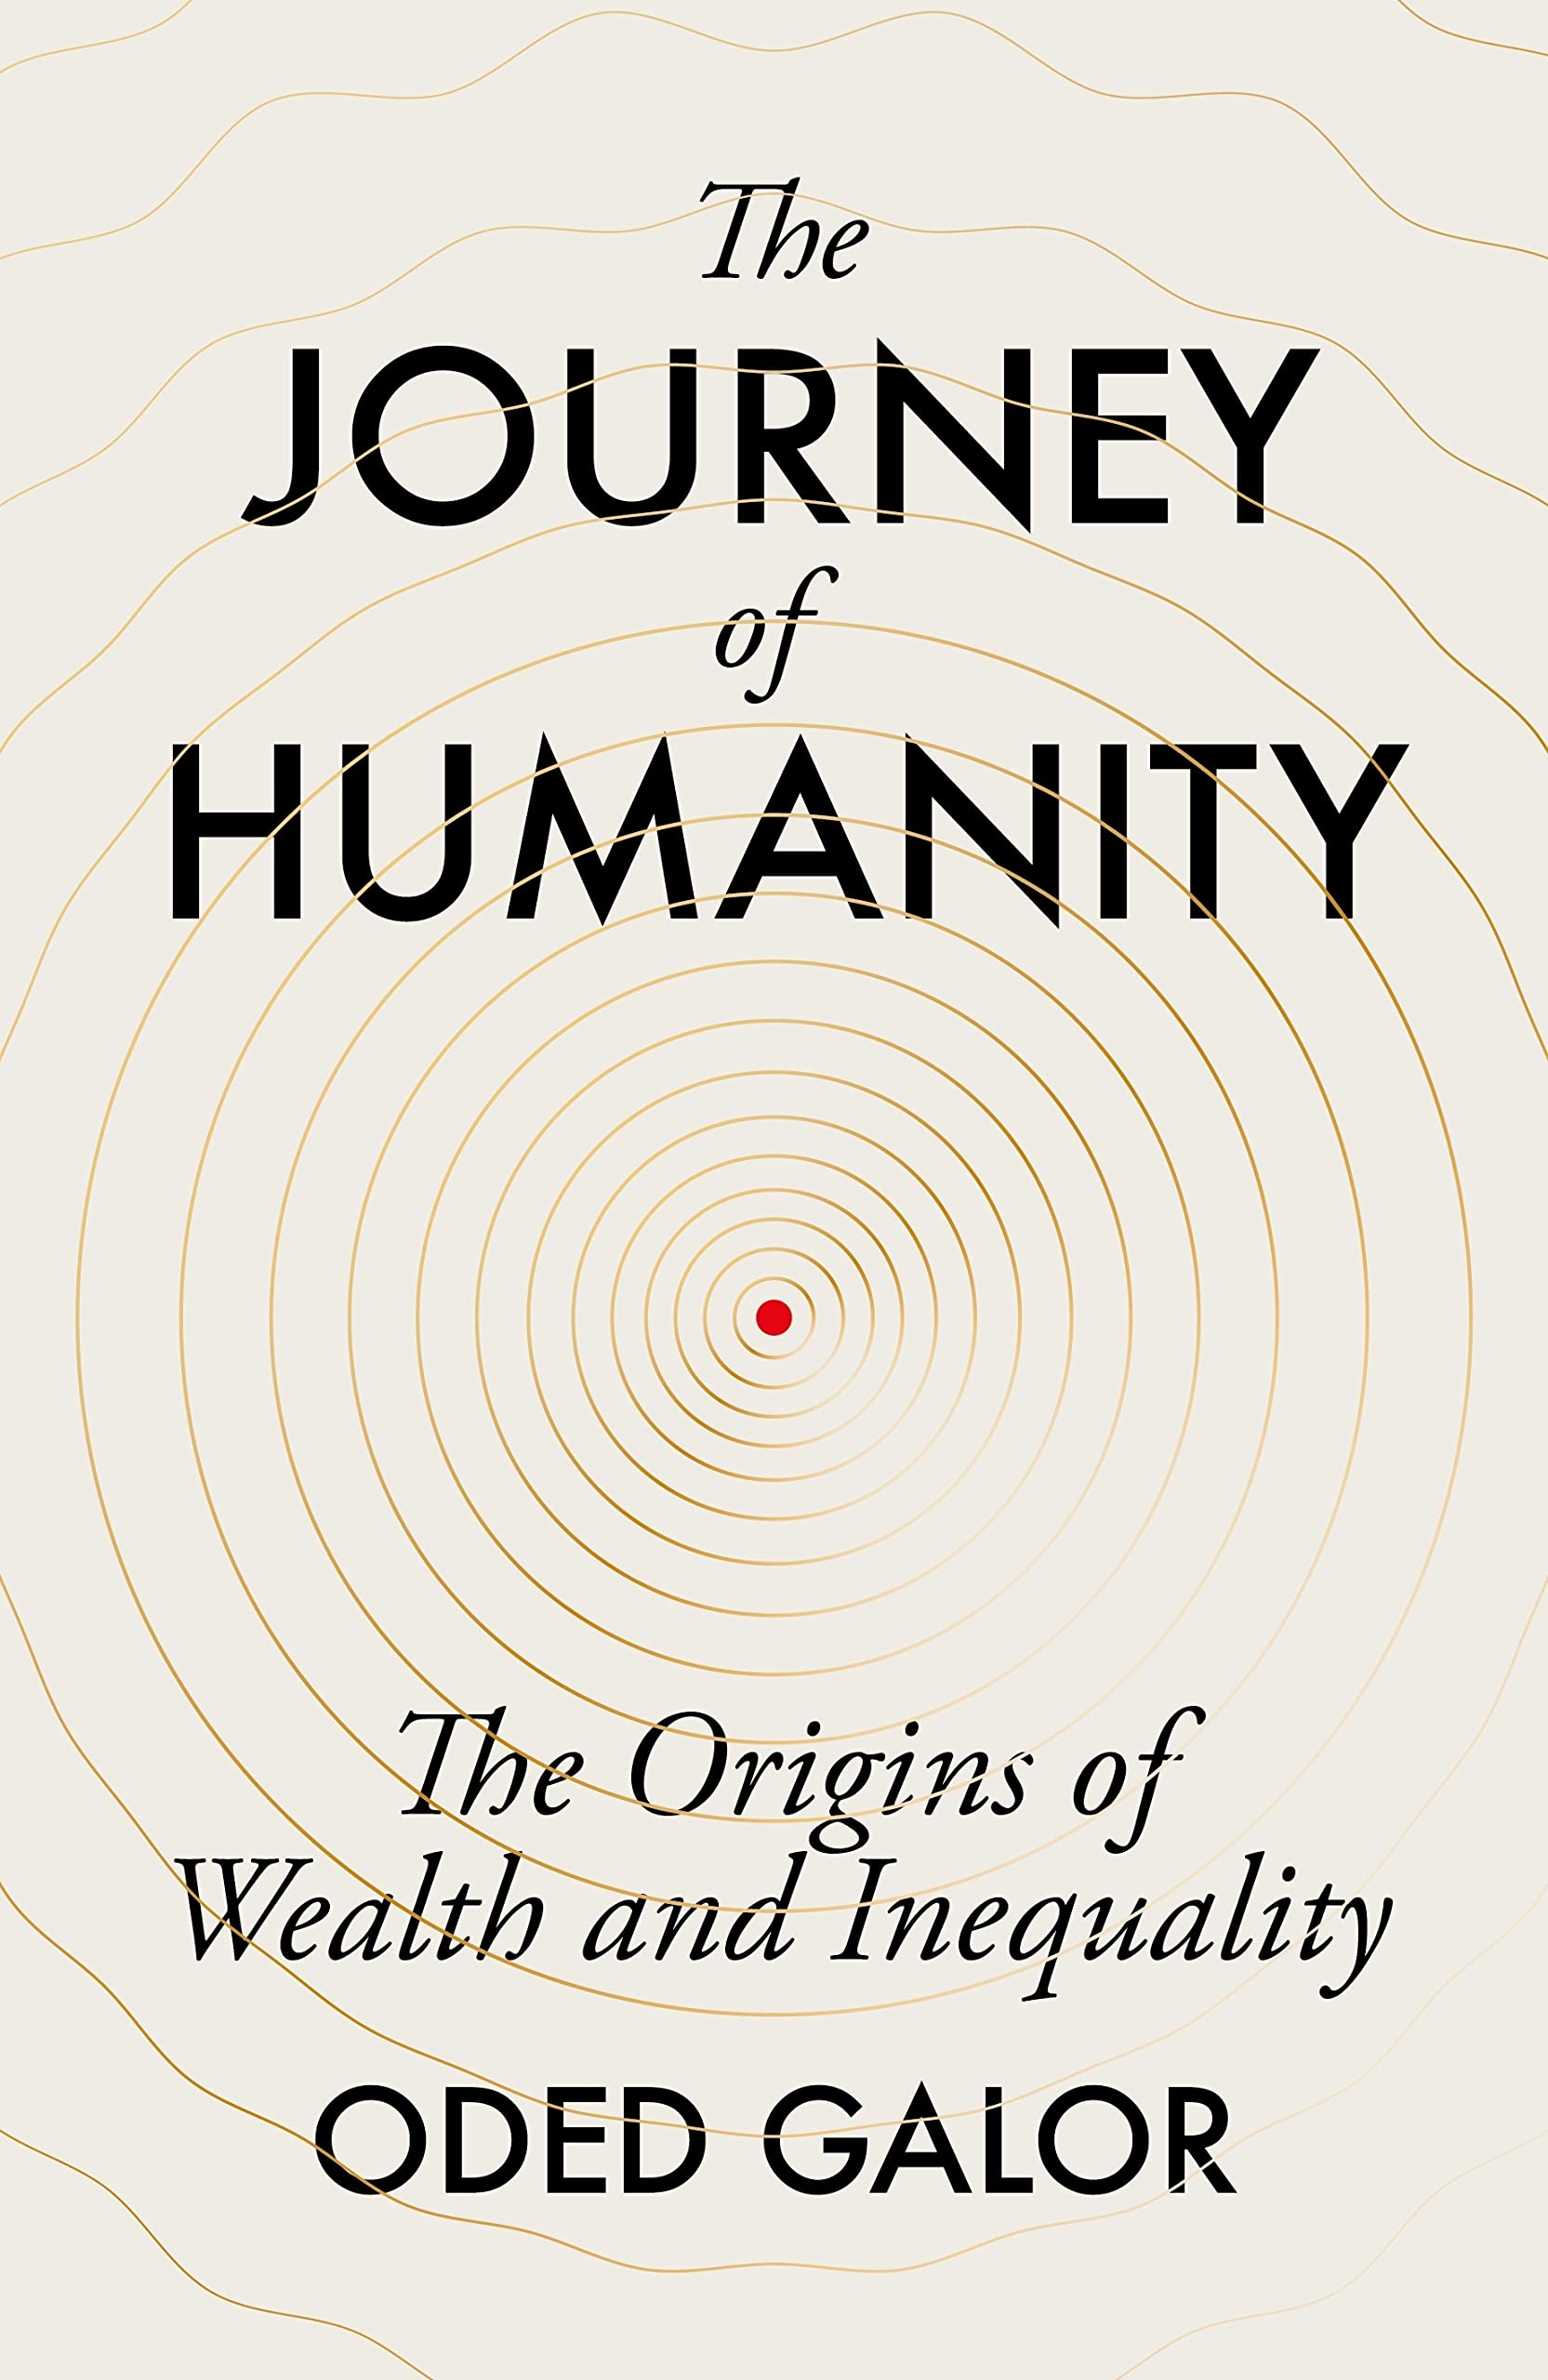 The Journey of Humanity | Oded Galor